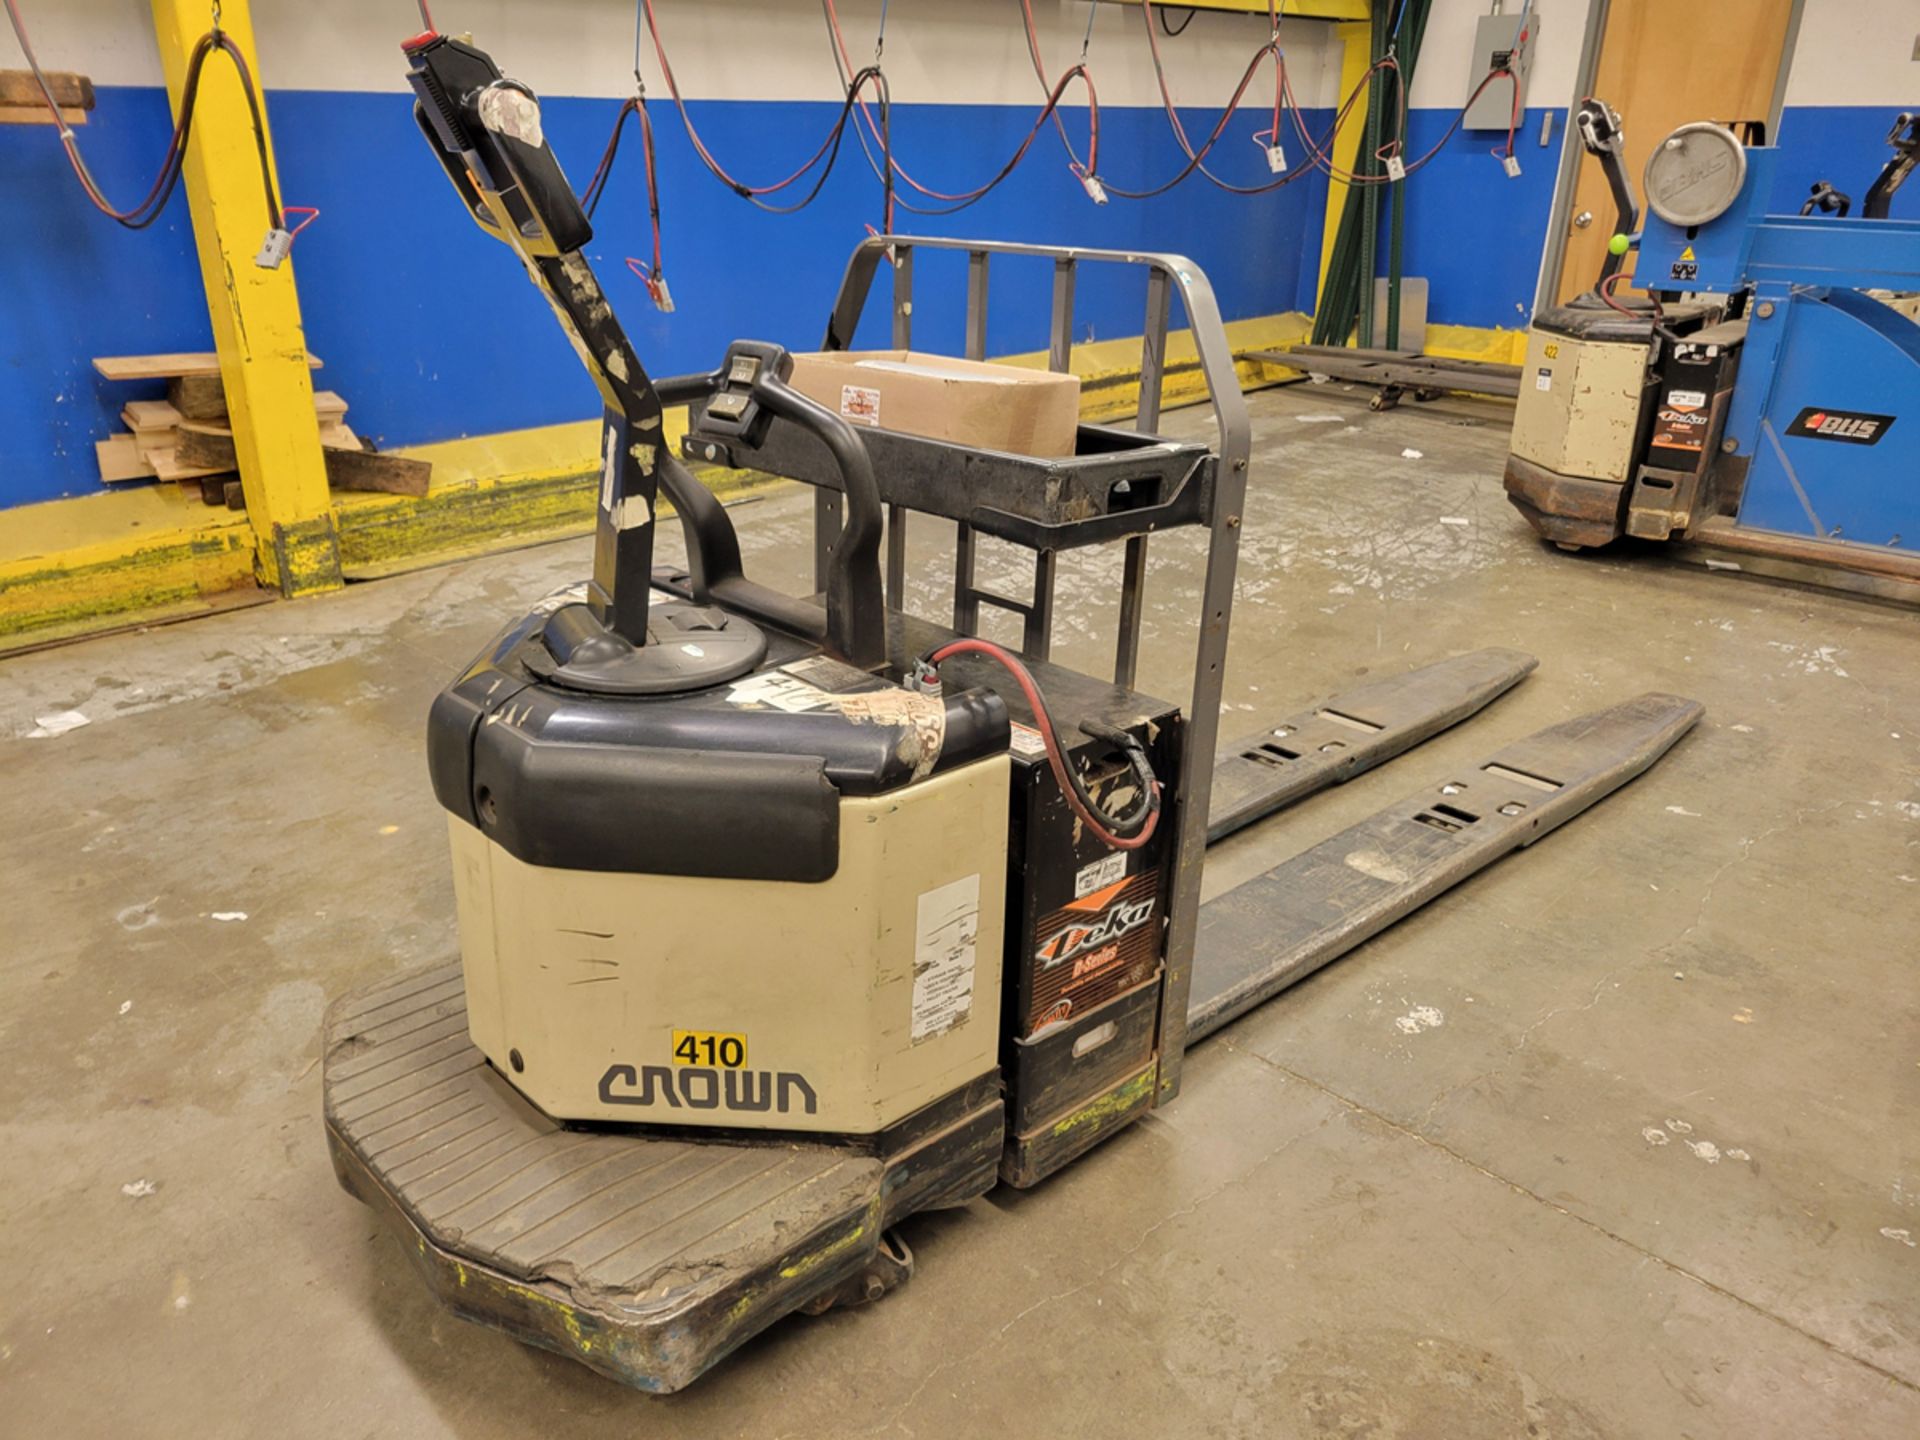 Crown PE3540-80 8,000lbs Electric 24V Rider Pallet Jack w/ Charger